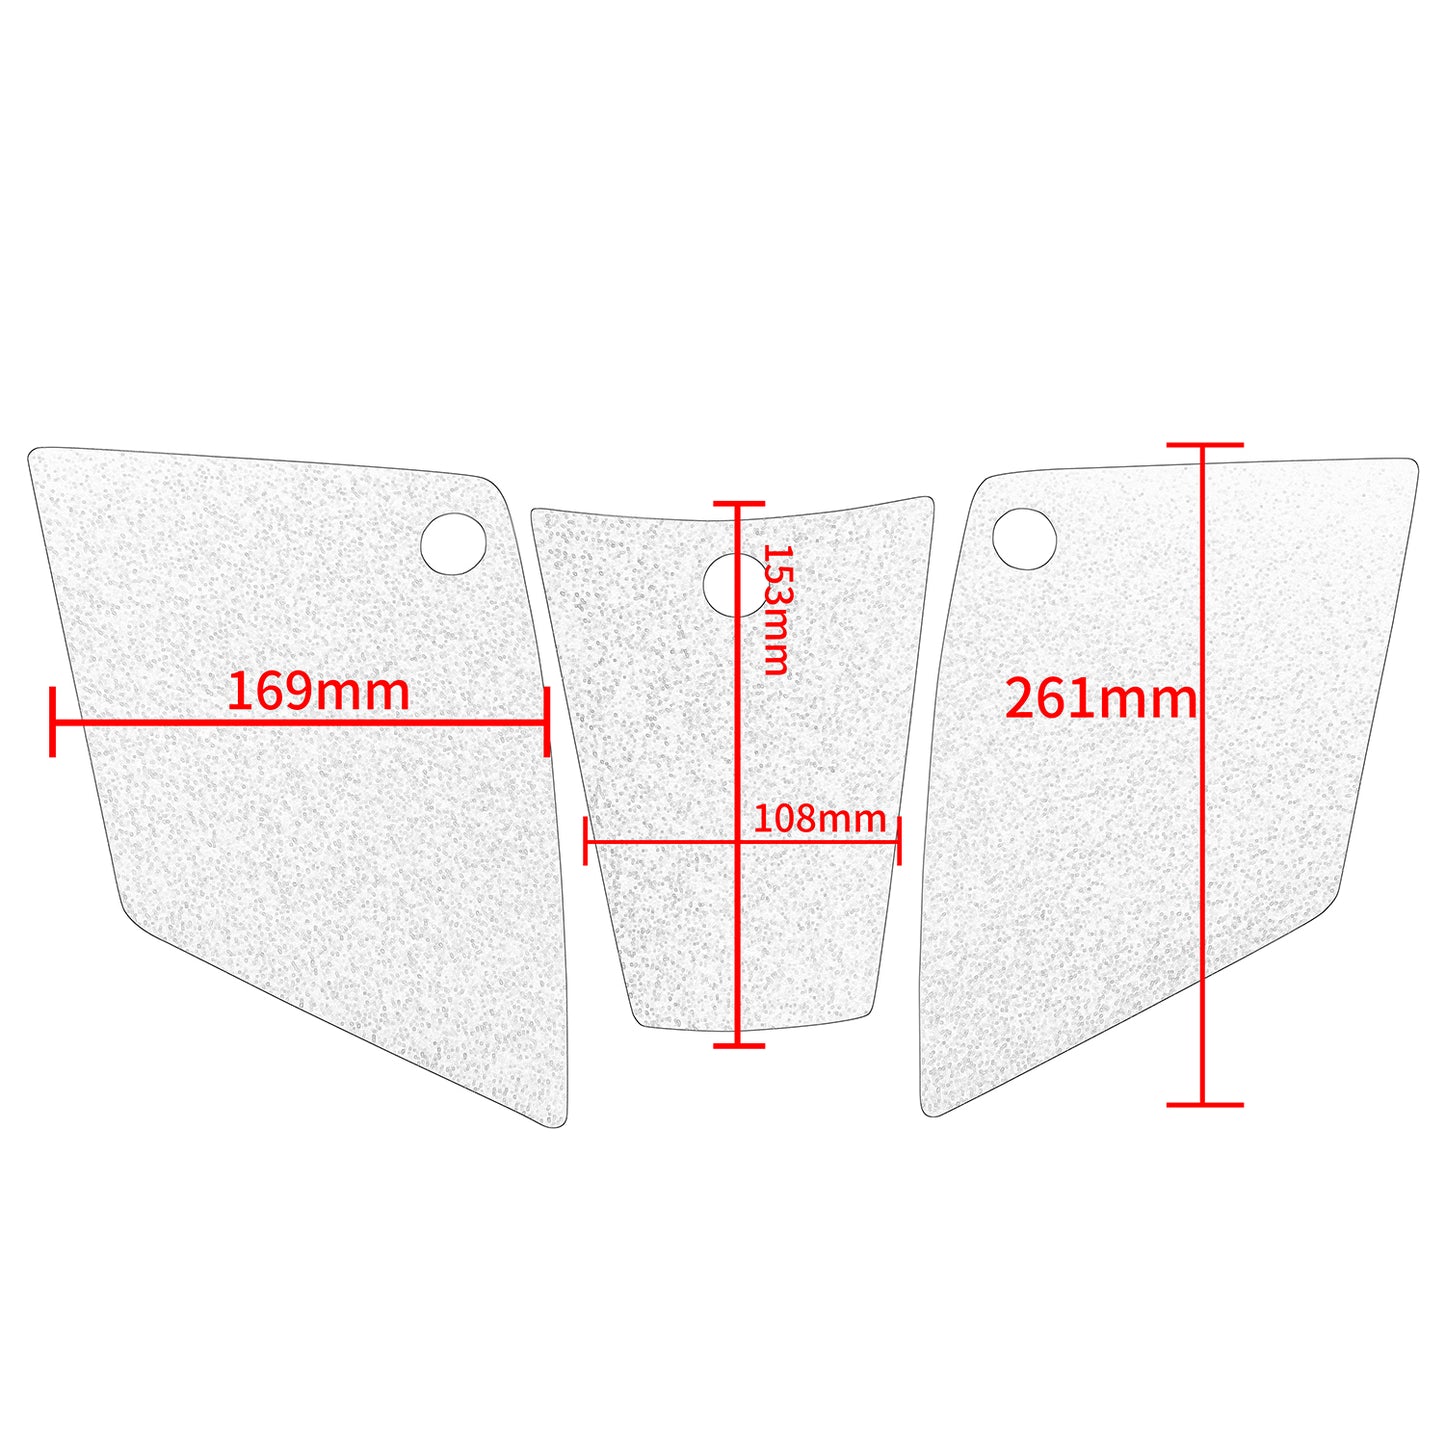 Wolfline Motorcycle Anti Slip Tank Pad Stickers Side Gas Tank Pad Knee Grip Decals Protection For CFMOTO 650MT 650 MT 2018 2019 2020 2021 2022